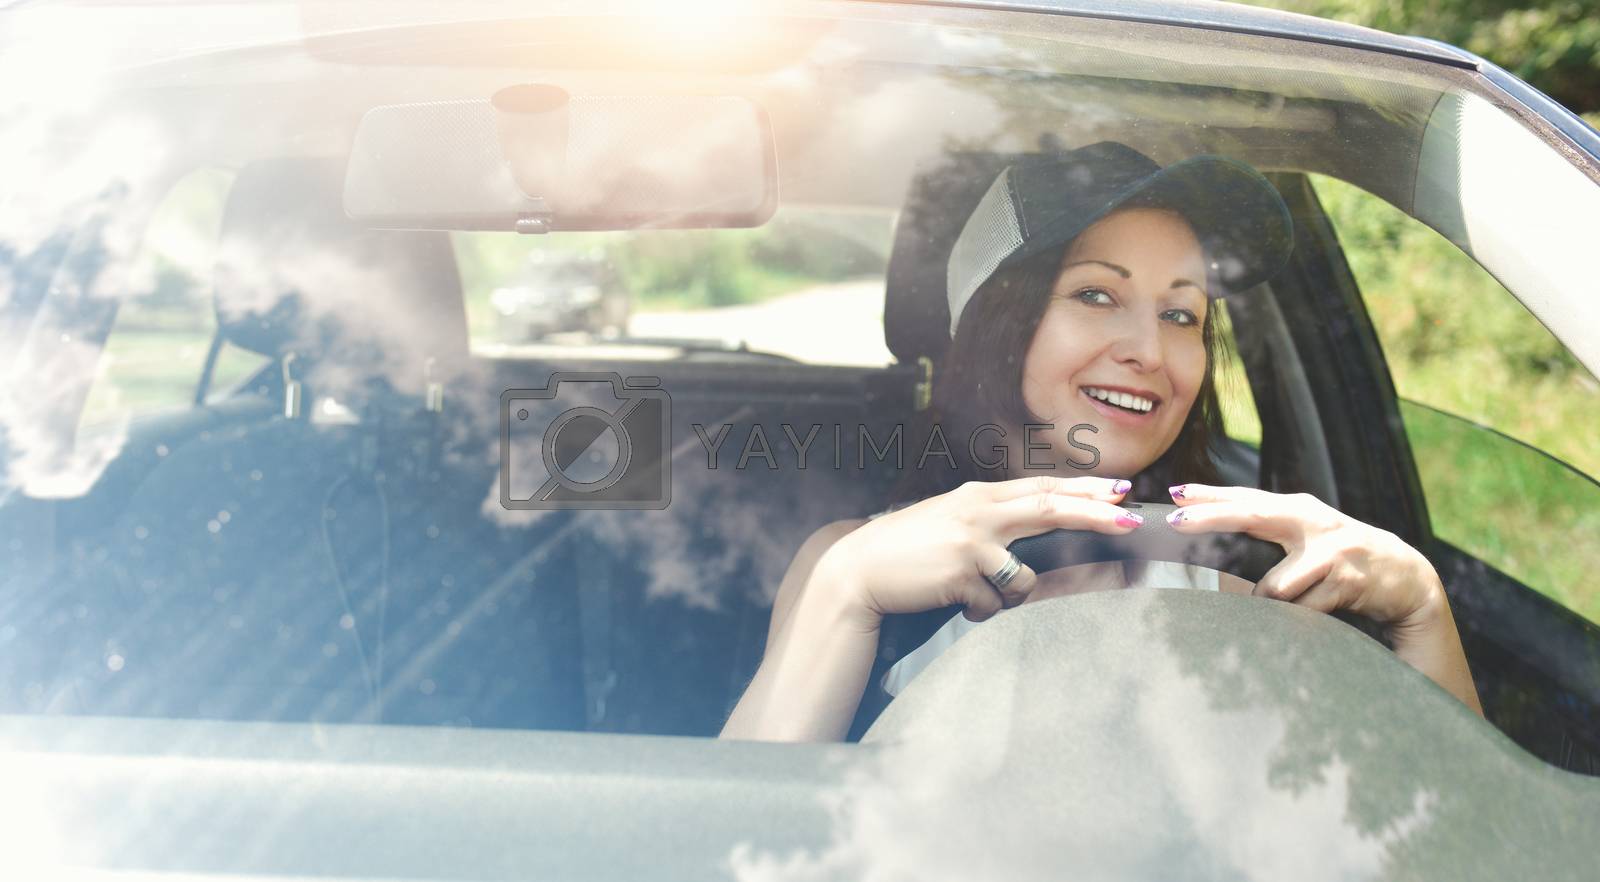 Royalty free image of Beautiful adult happy woman wearing hat driving her car in summer day by Nickstock